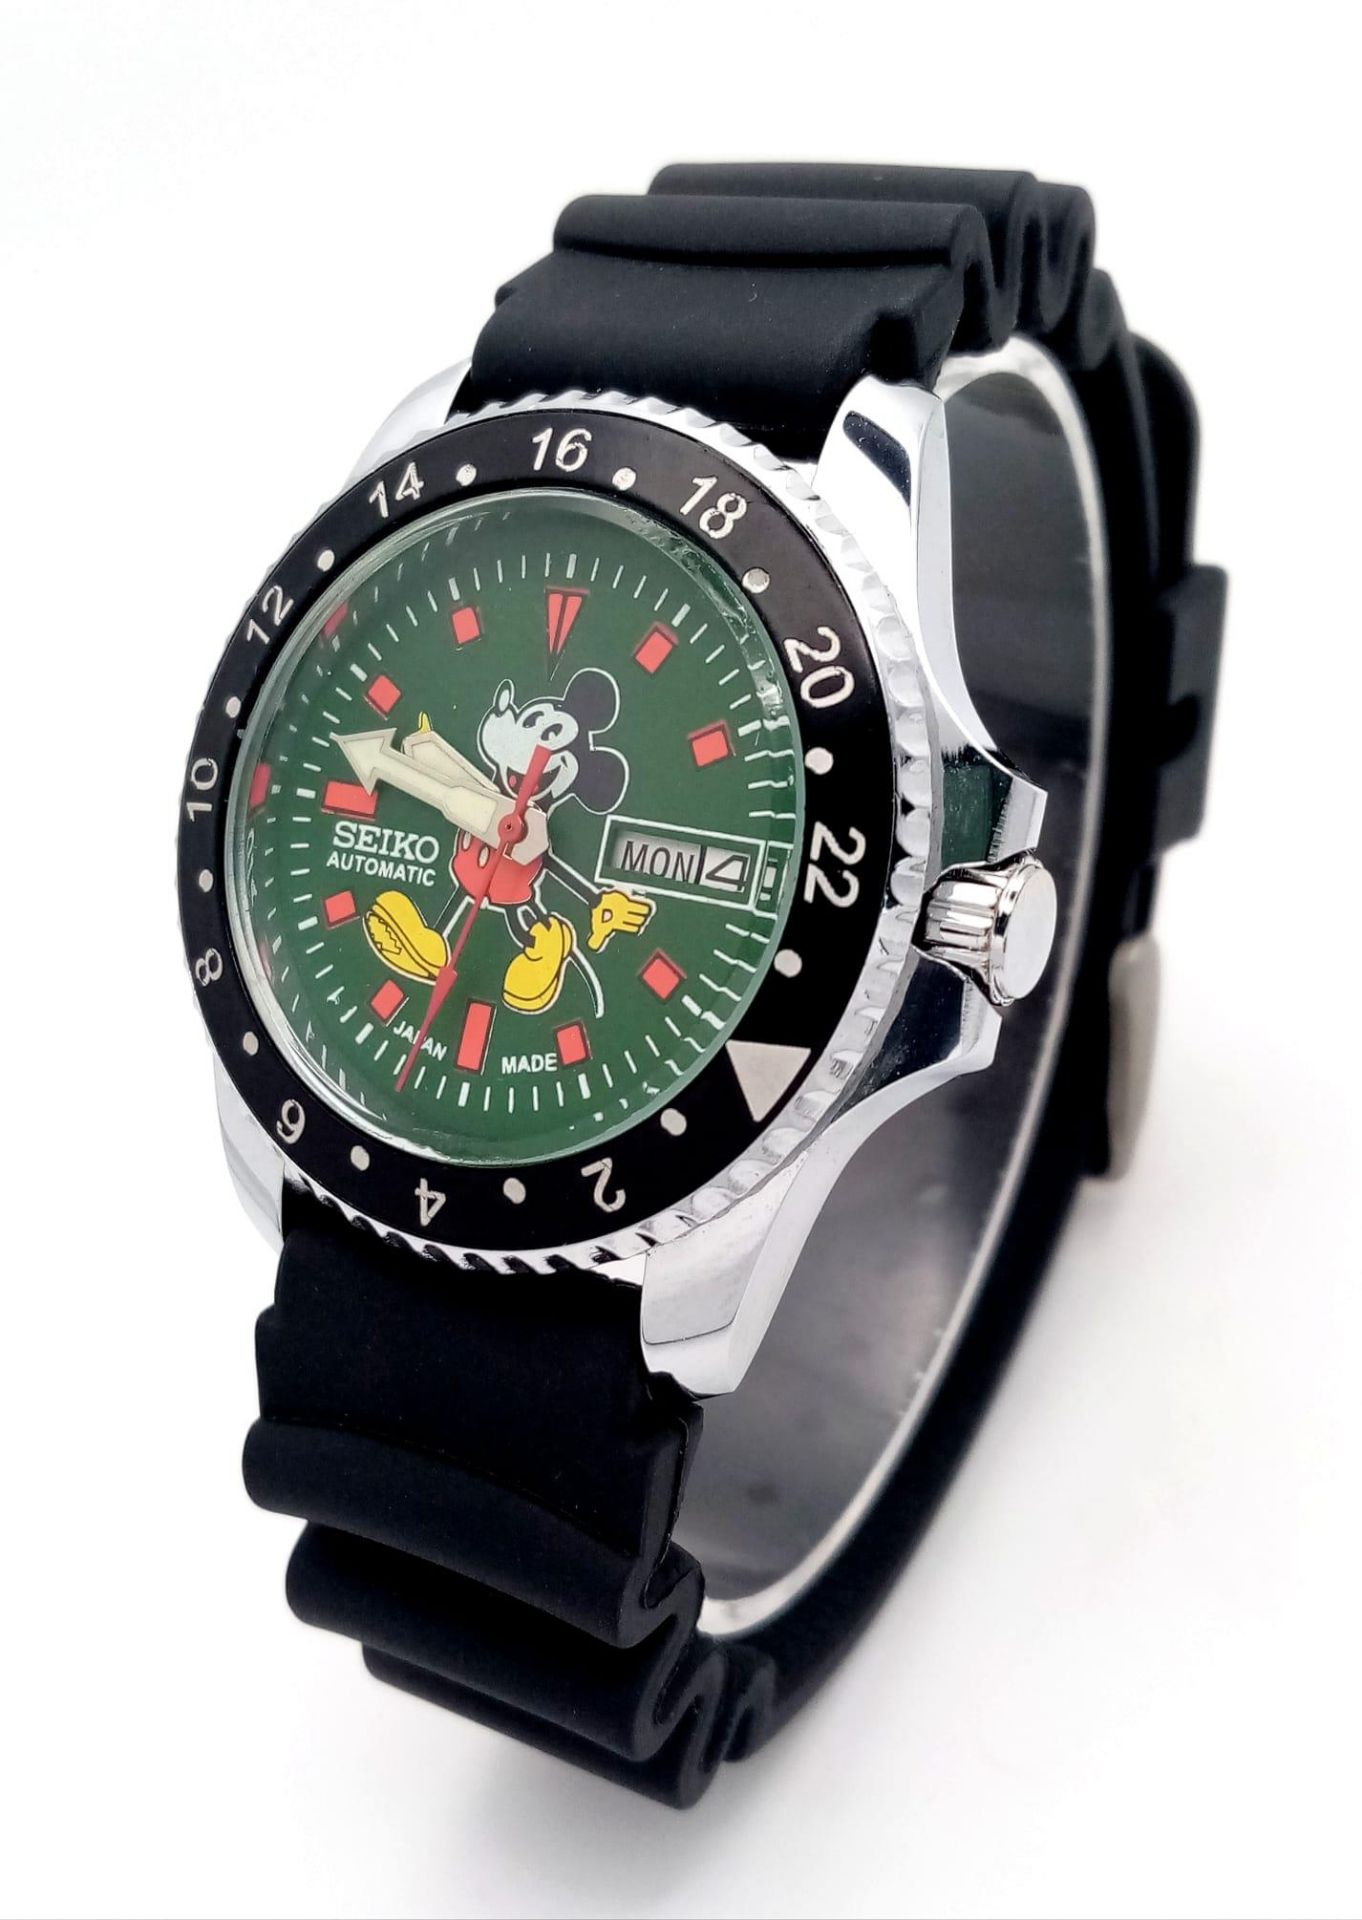 A Seiko Automatic Mickey Mouse Watch. Black rubber sport strap. Stainless steel case with black